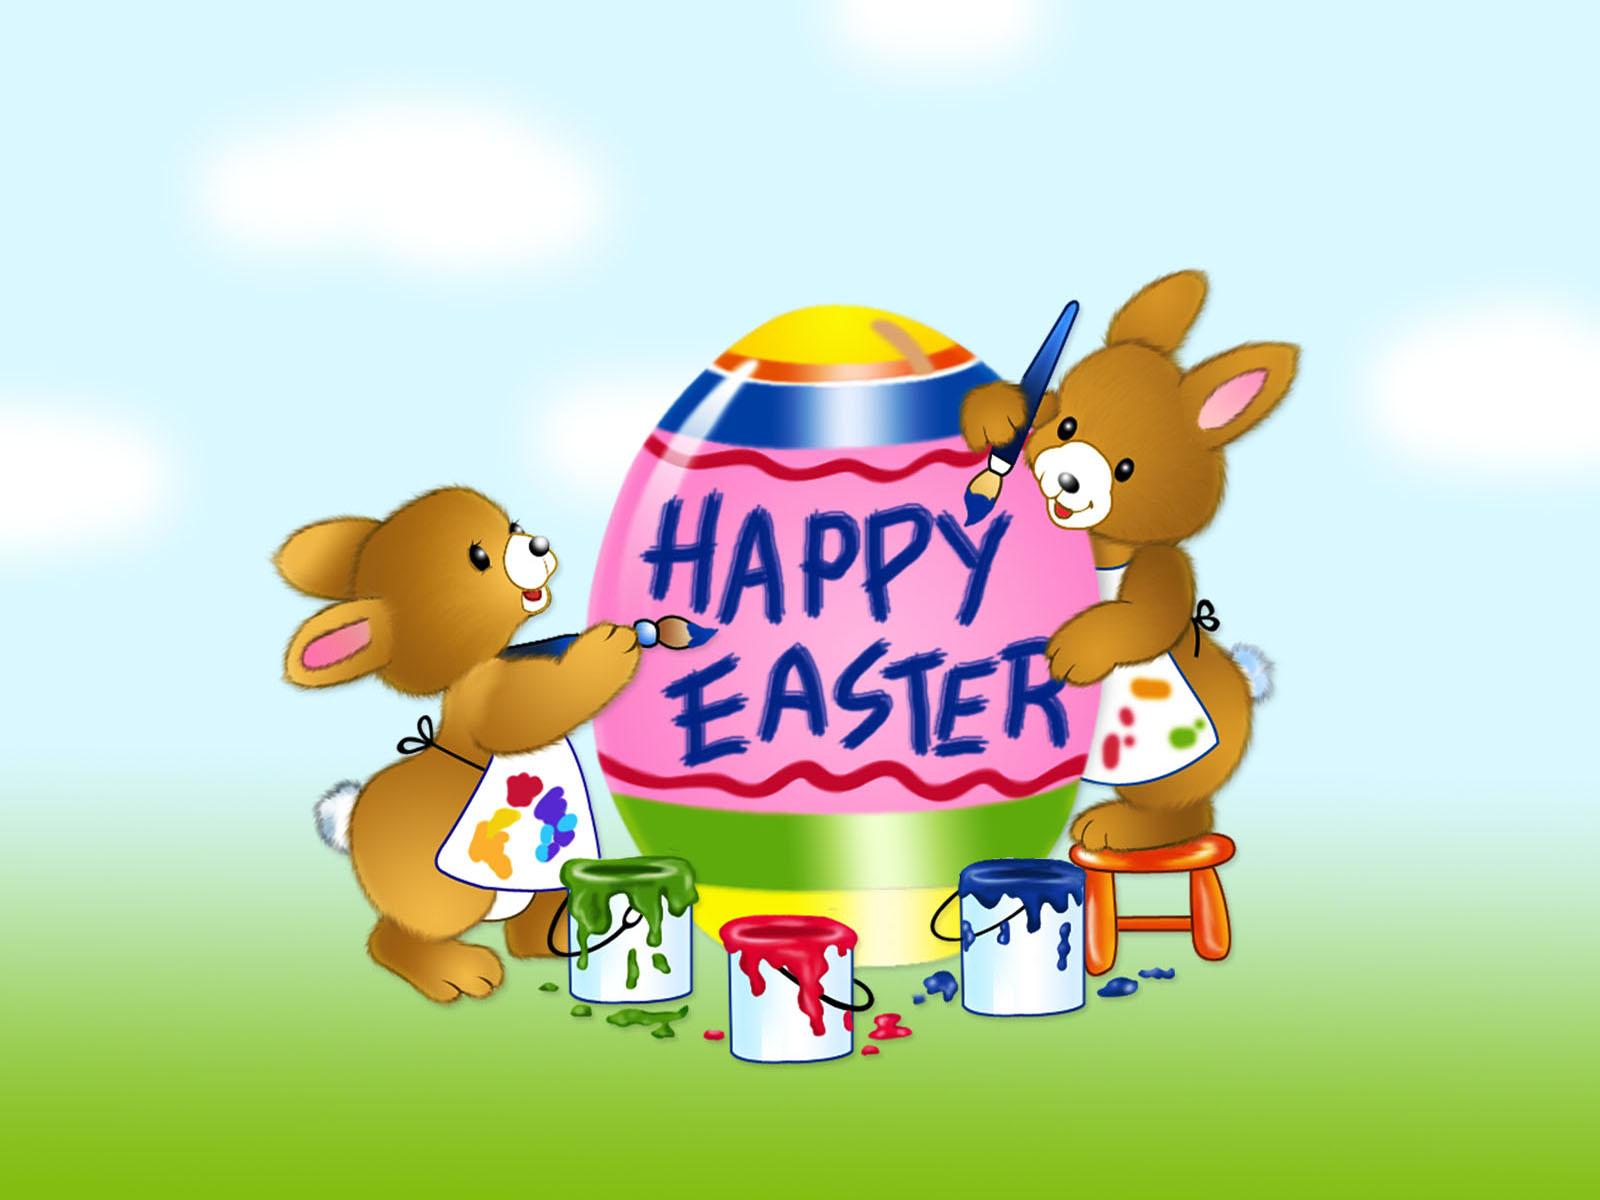 Happy Easter Image 2019 Picture Photo HD Wallpaper Free